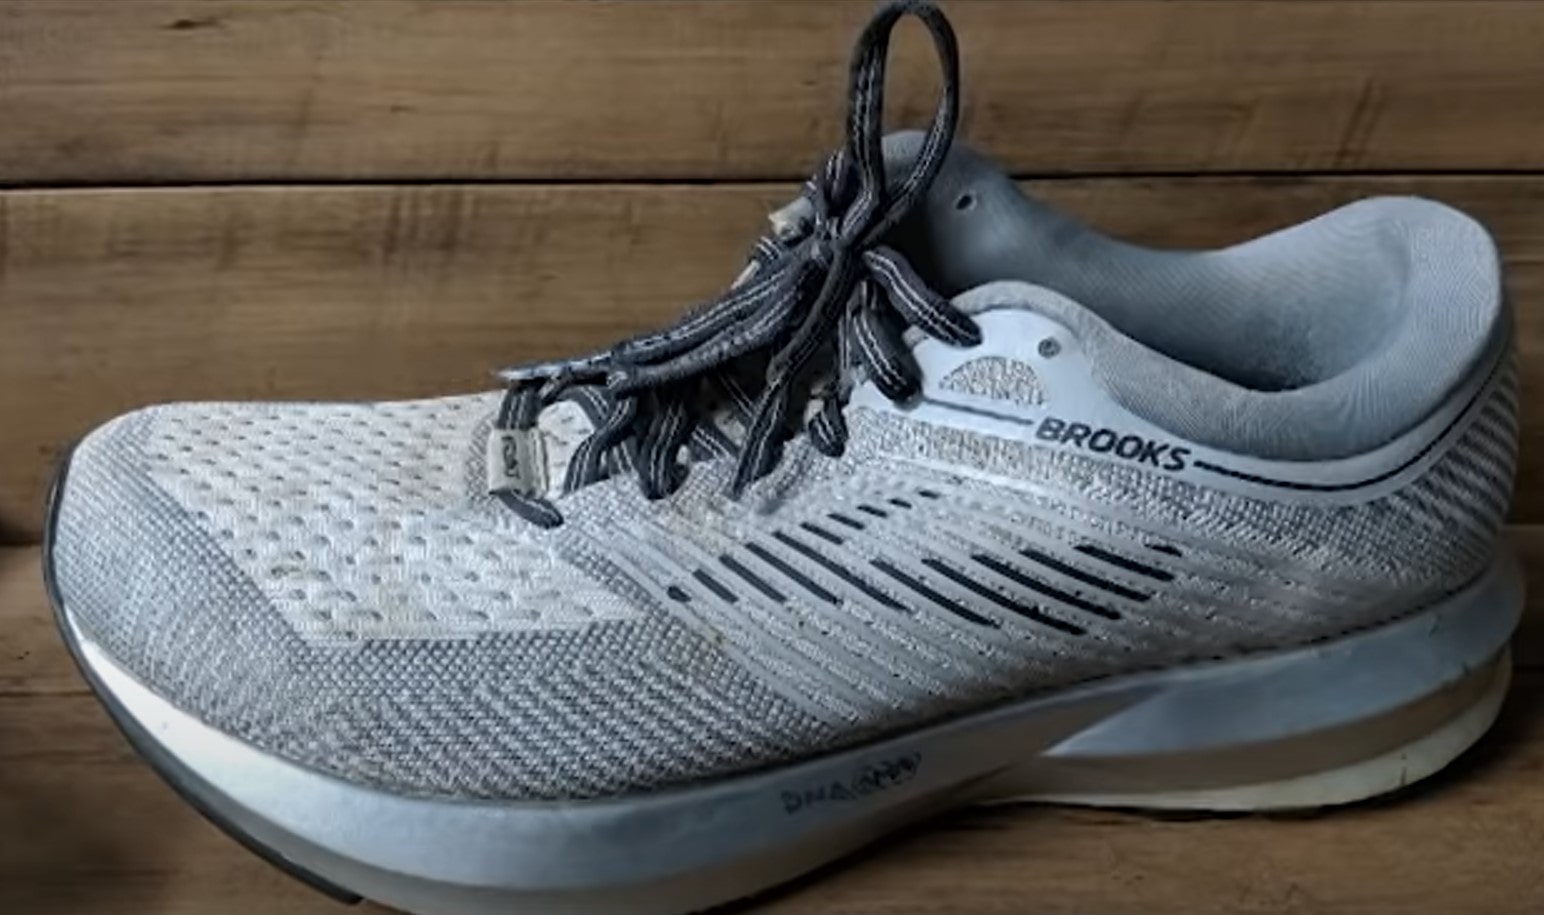 How to Wash Brooks Running Shoes Internal Liner?